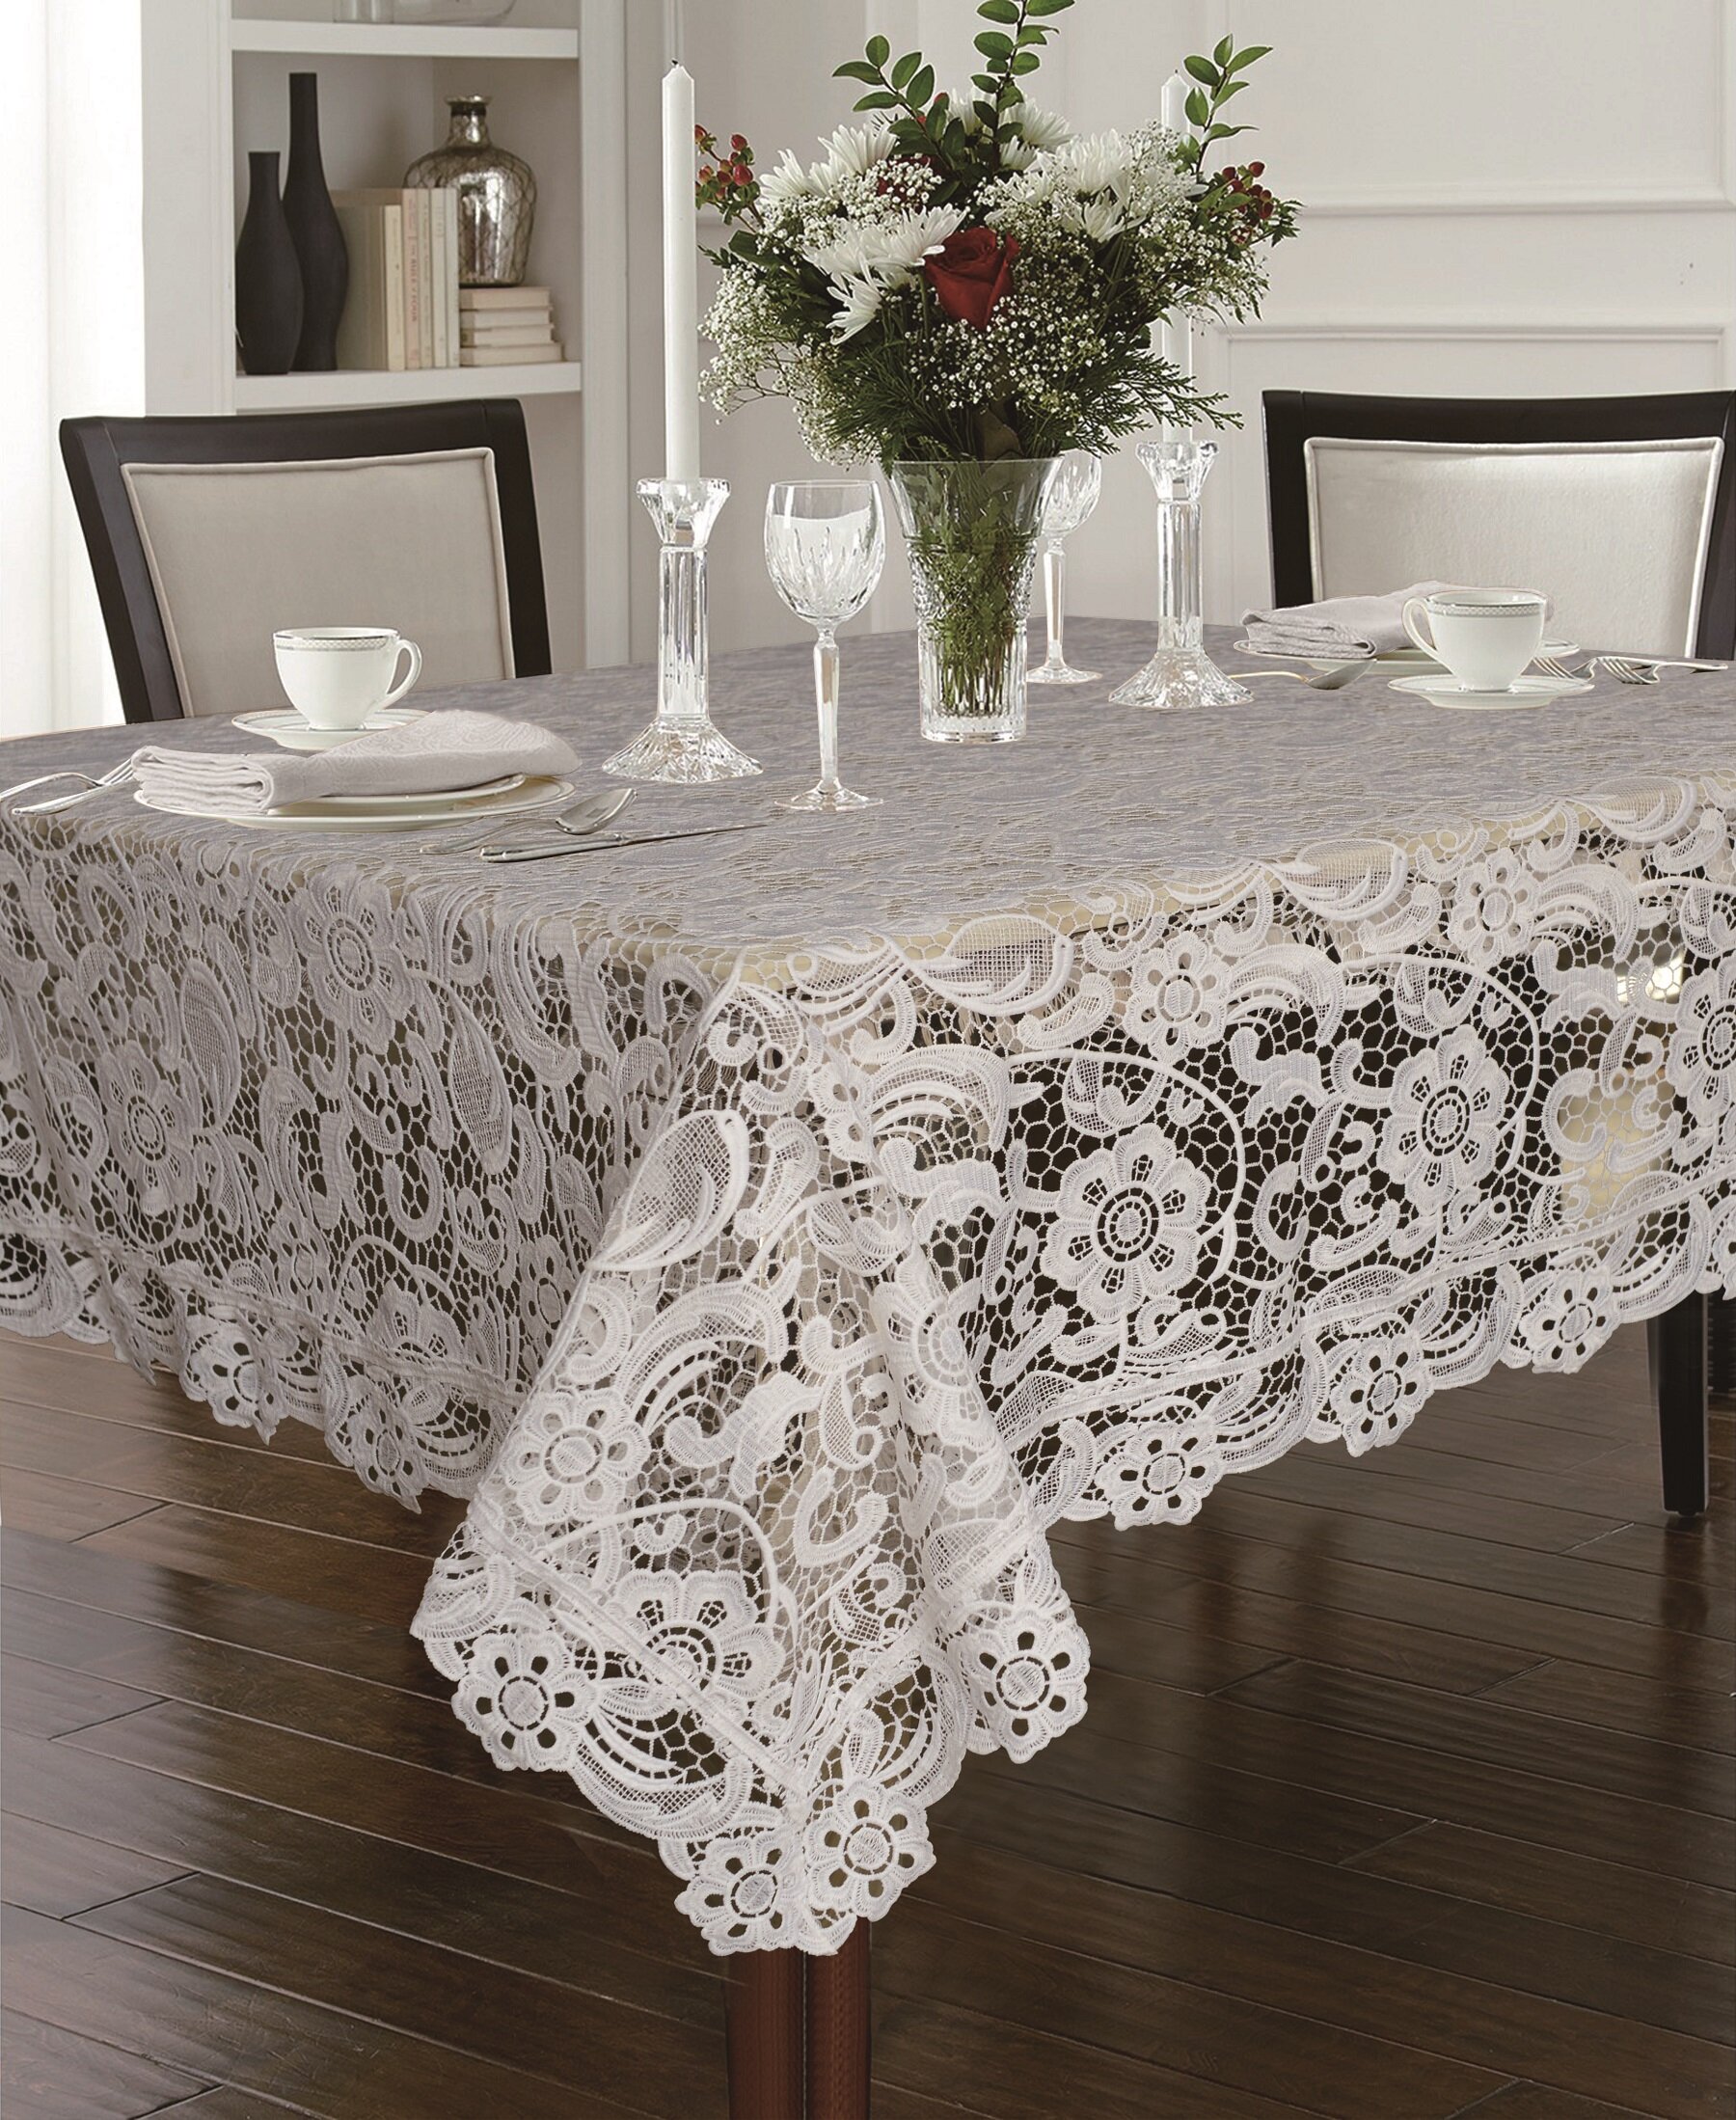 Round Lace Tablecloth Embroidered Floral Table Covers Semi Sheer Romantic Decor